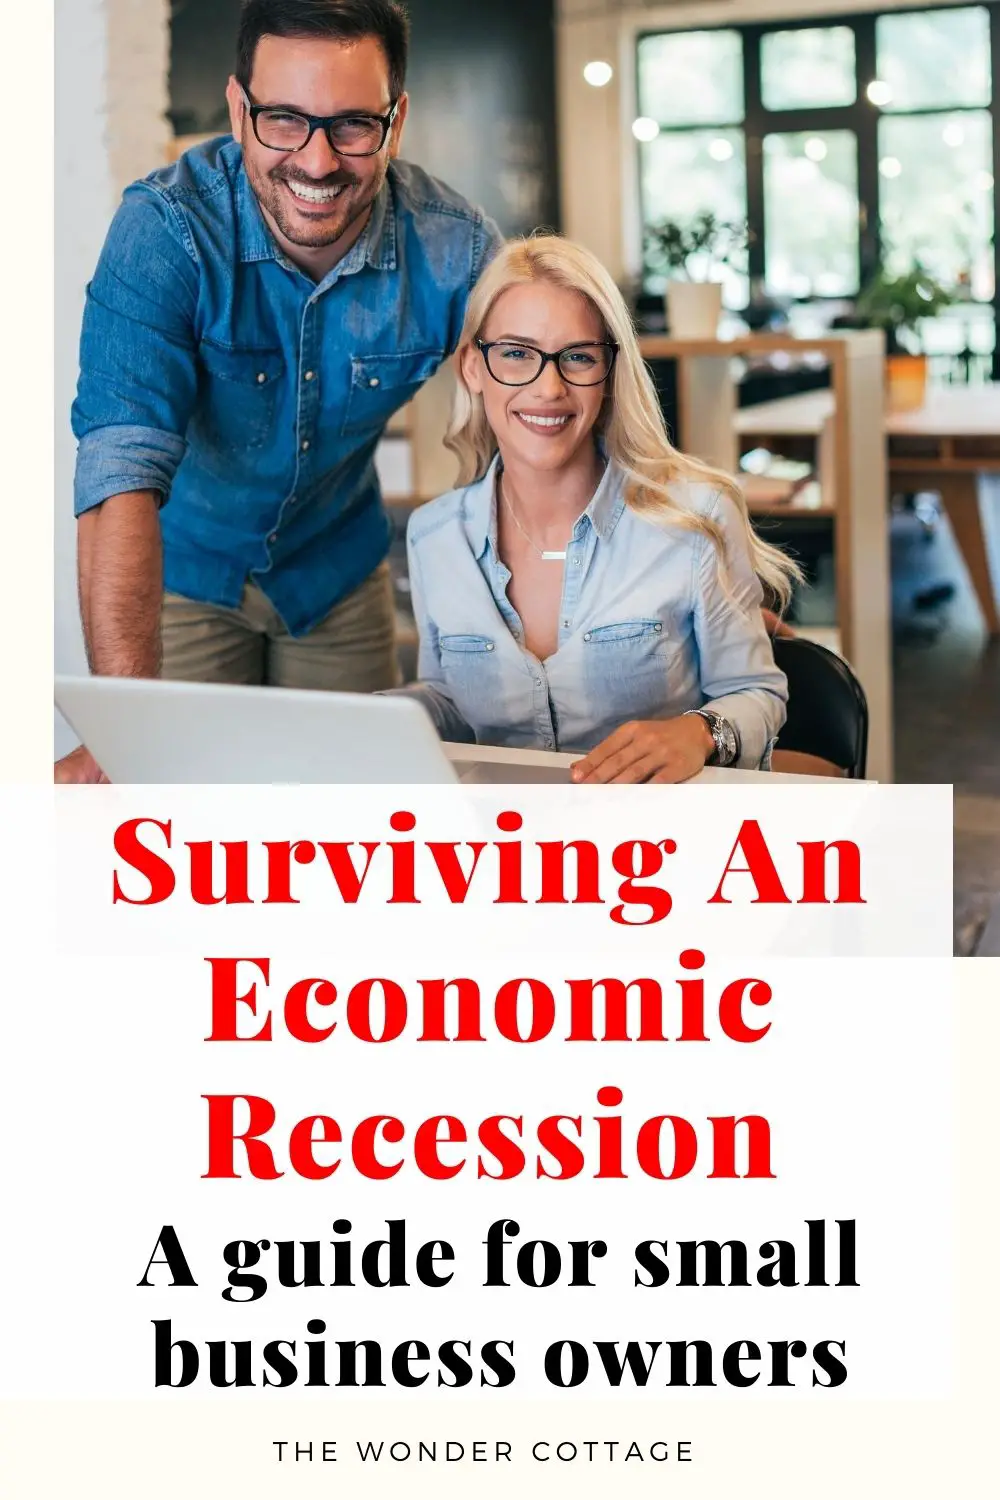 Surviving a Recession: A Guide for Small Business Owners